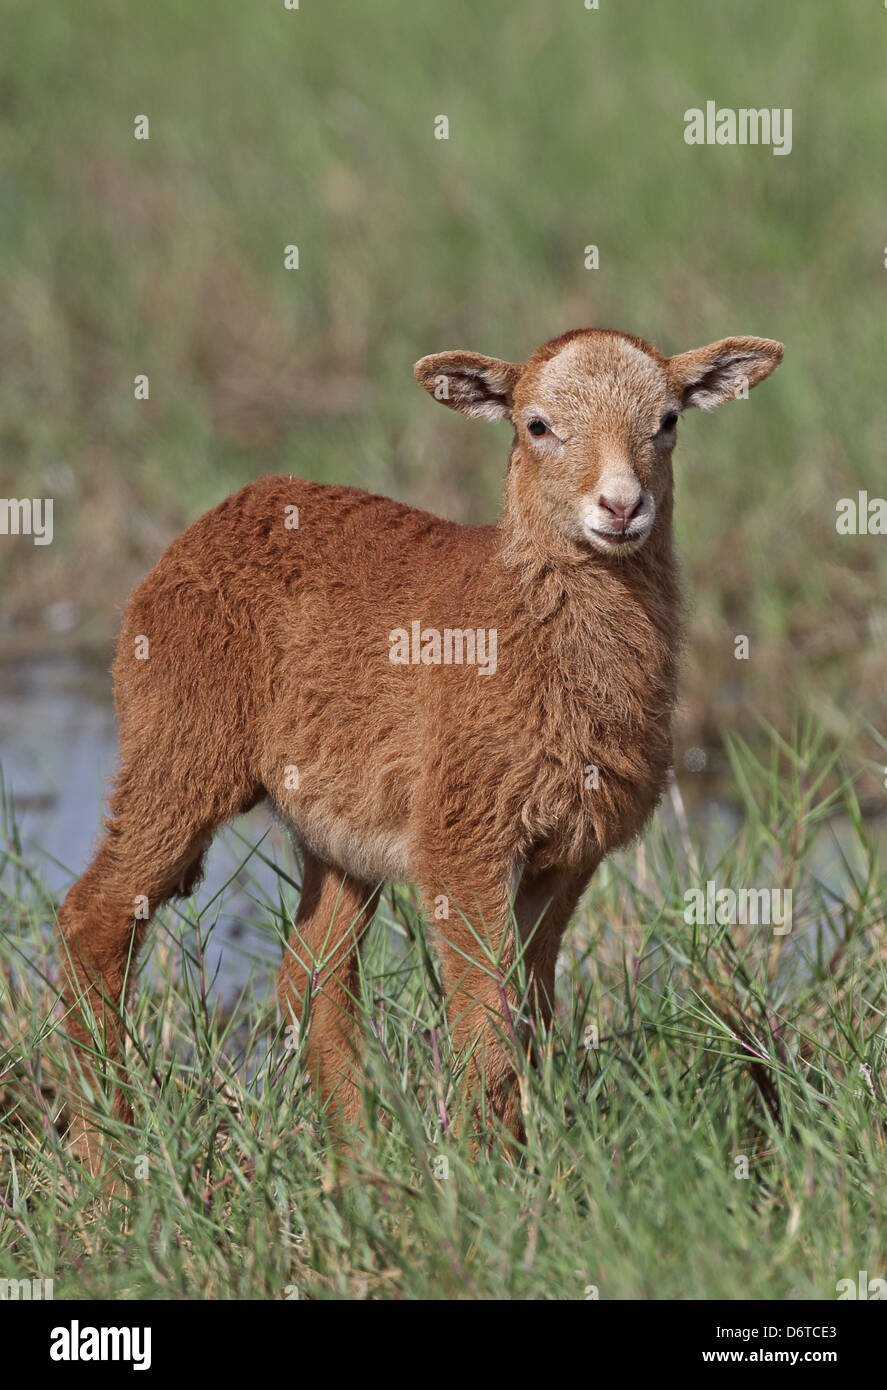 Domestic Sheep, Barbados Blackbelly lamb, standing in wet pasture, St. Lucia, Windward Islands, Lesser Antilles, December Stock Photo